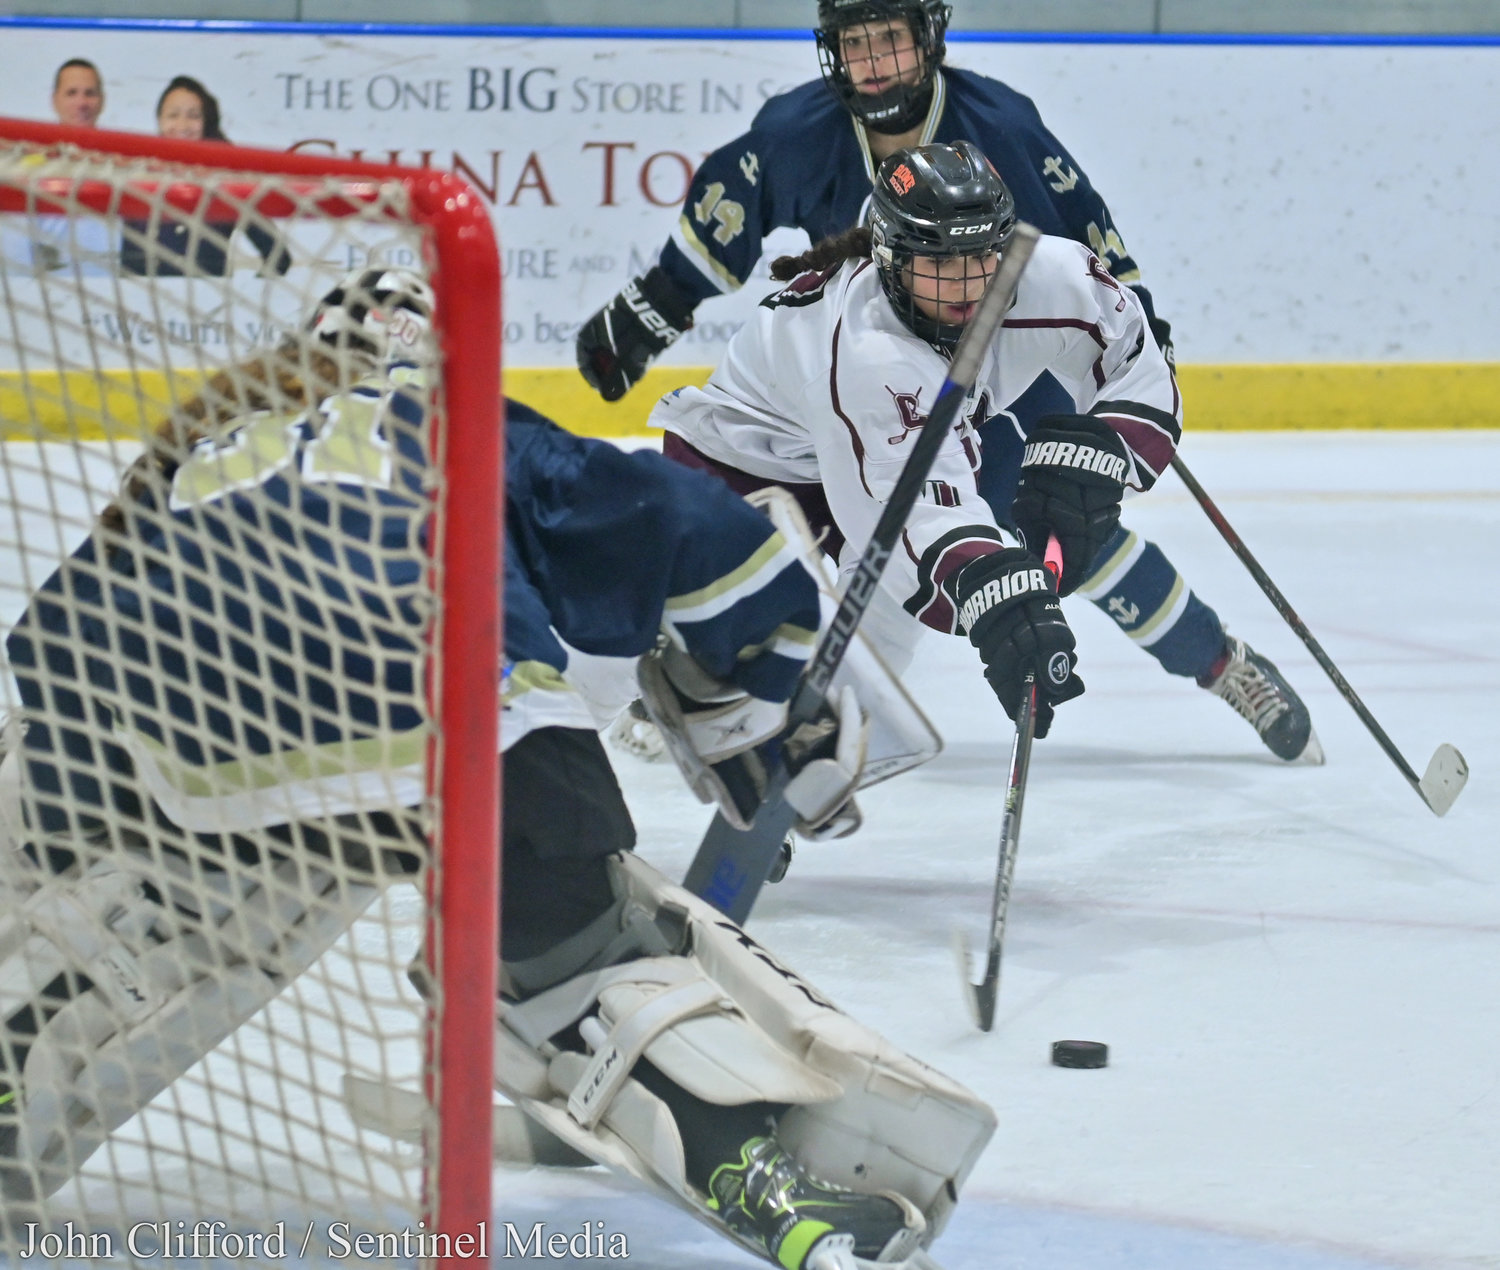 The Clinton Warriors in action against the Skaneateles Lakers in the Section III girls ice hockey championship Wednesday night in Nedrow. Clinton beat Skaneateles 1-0 in overtime. Clinton #7 swooping with Lakers goalie #31.